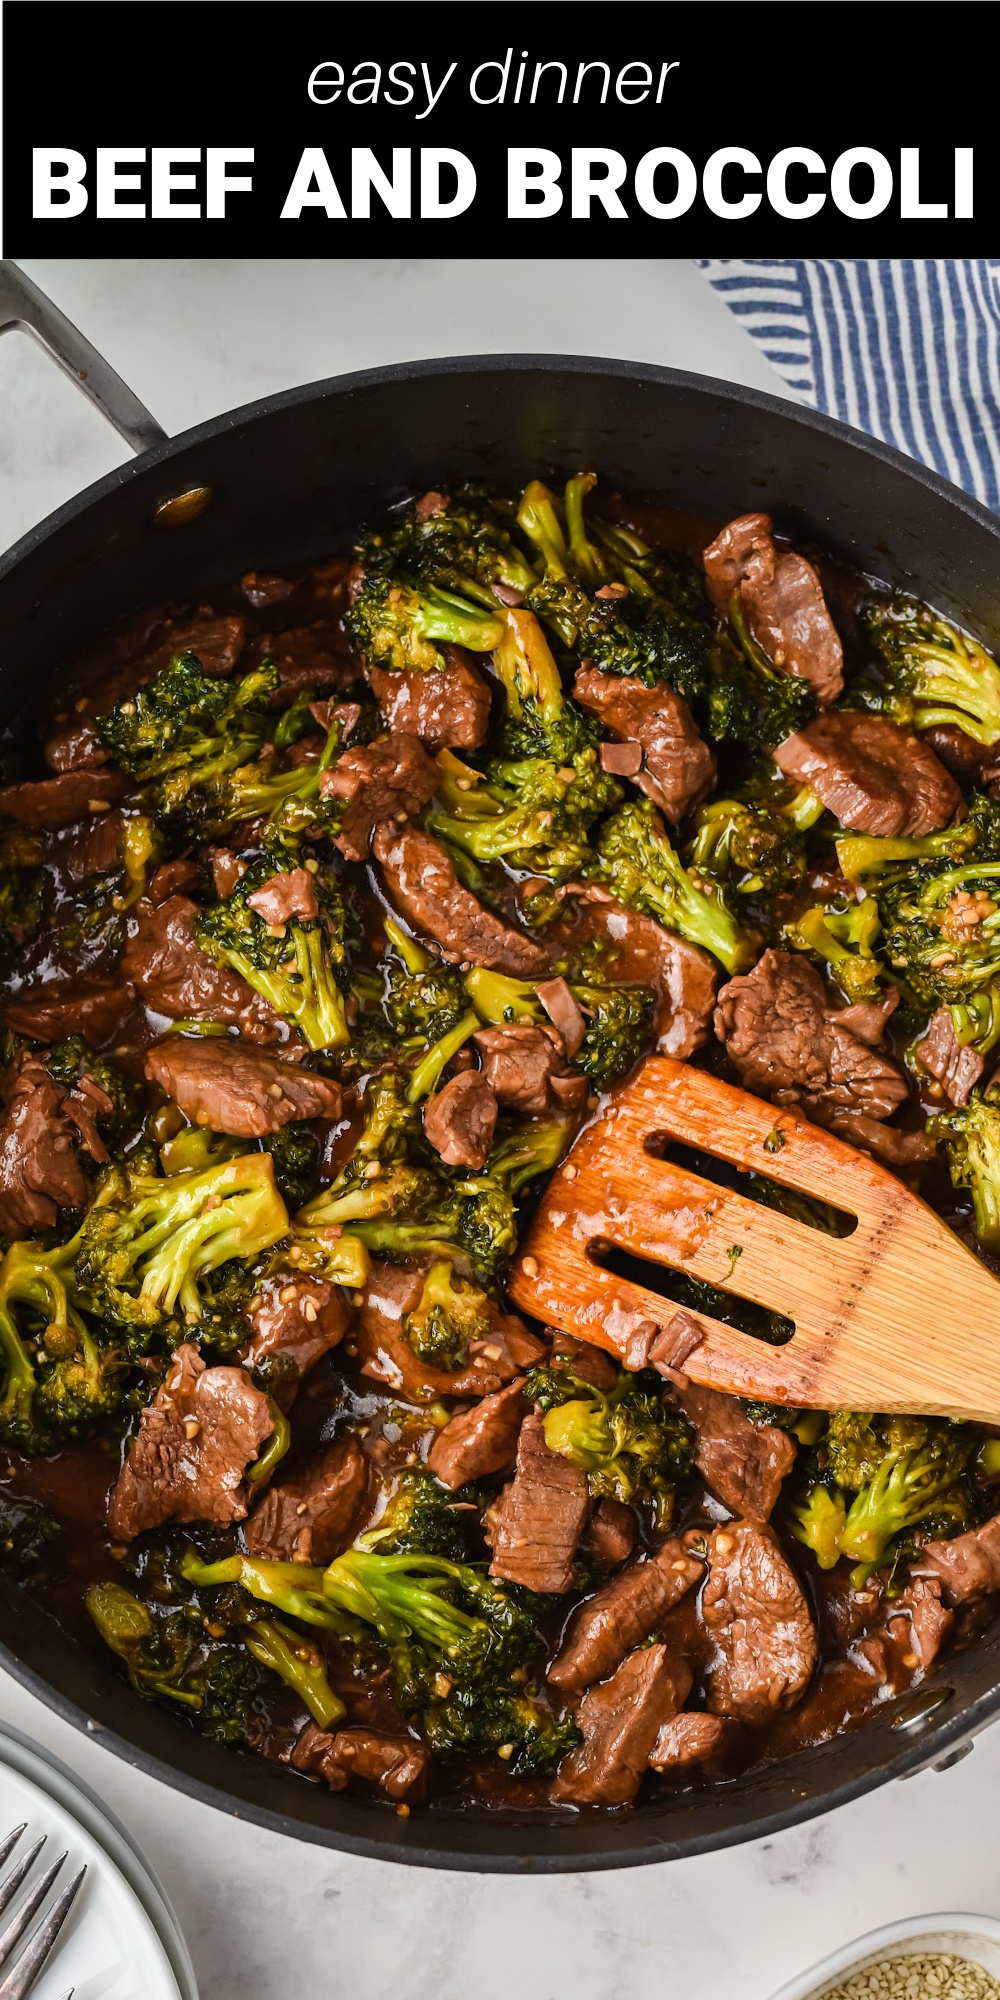 Say goodbye to take out and hello to the best Beef and Broccoli you've ever tasted! Tender and juicy slices of flank steak stir fries with fresh broccoli and the most amazing and flavorful sauce! It's quick, it's easy, and it's so much better than what you'll find at any local Chinese restaurant.